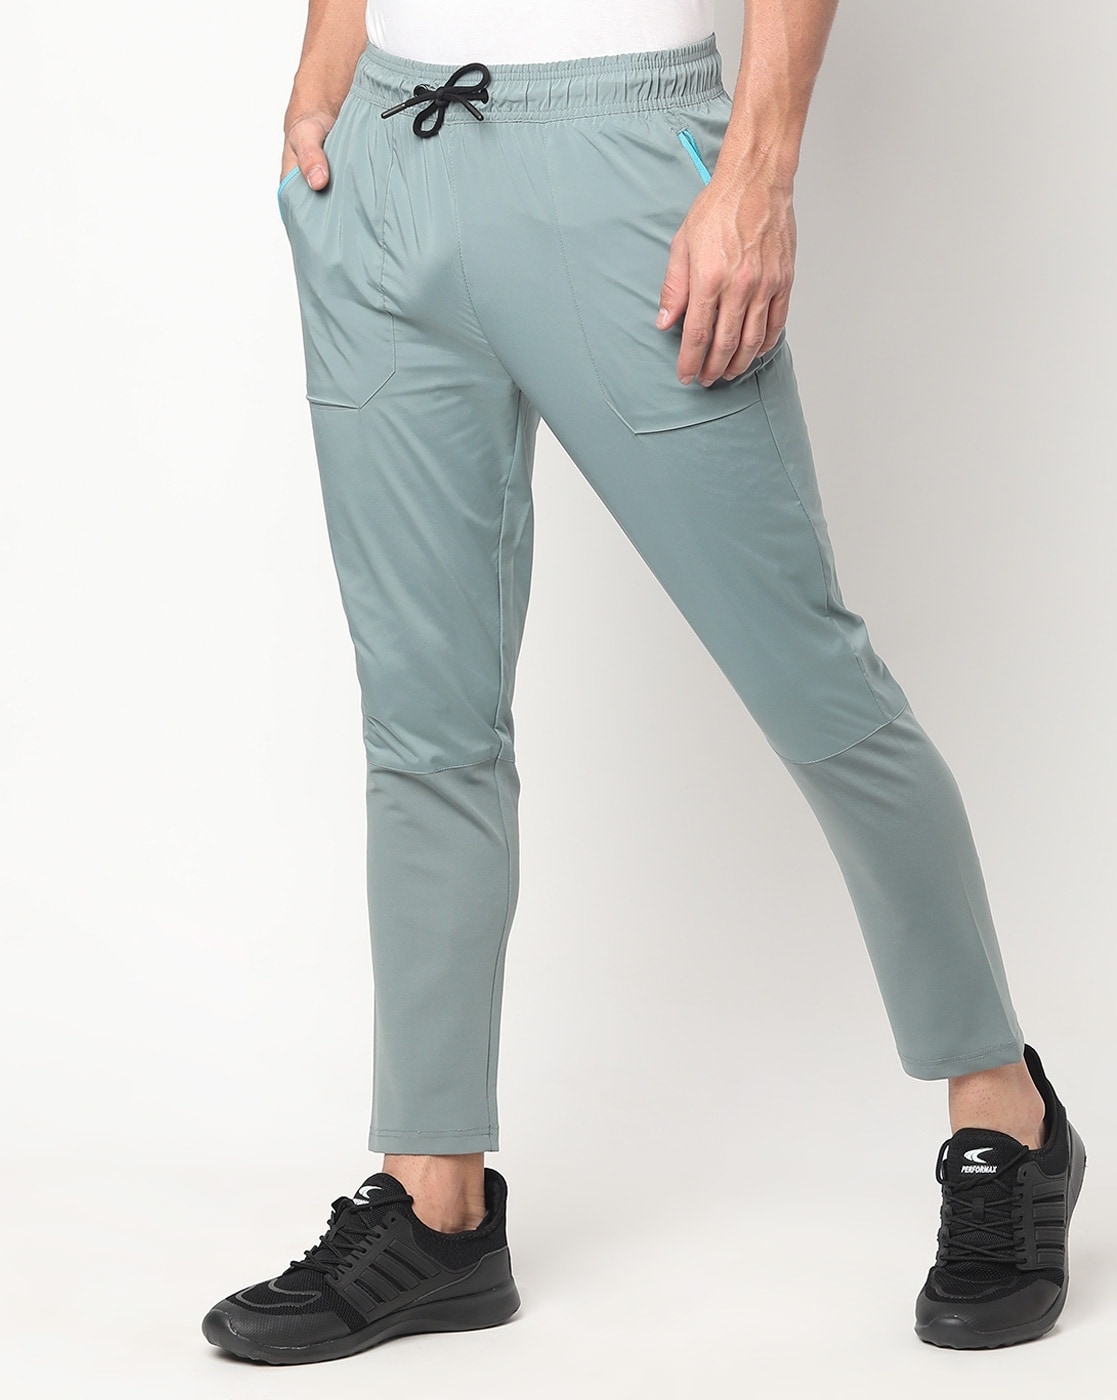 Buy Hybrid Trouser Formal and casual Pant online for men Beyours